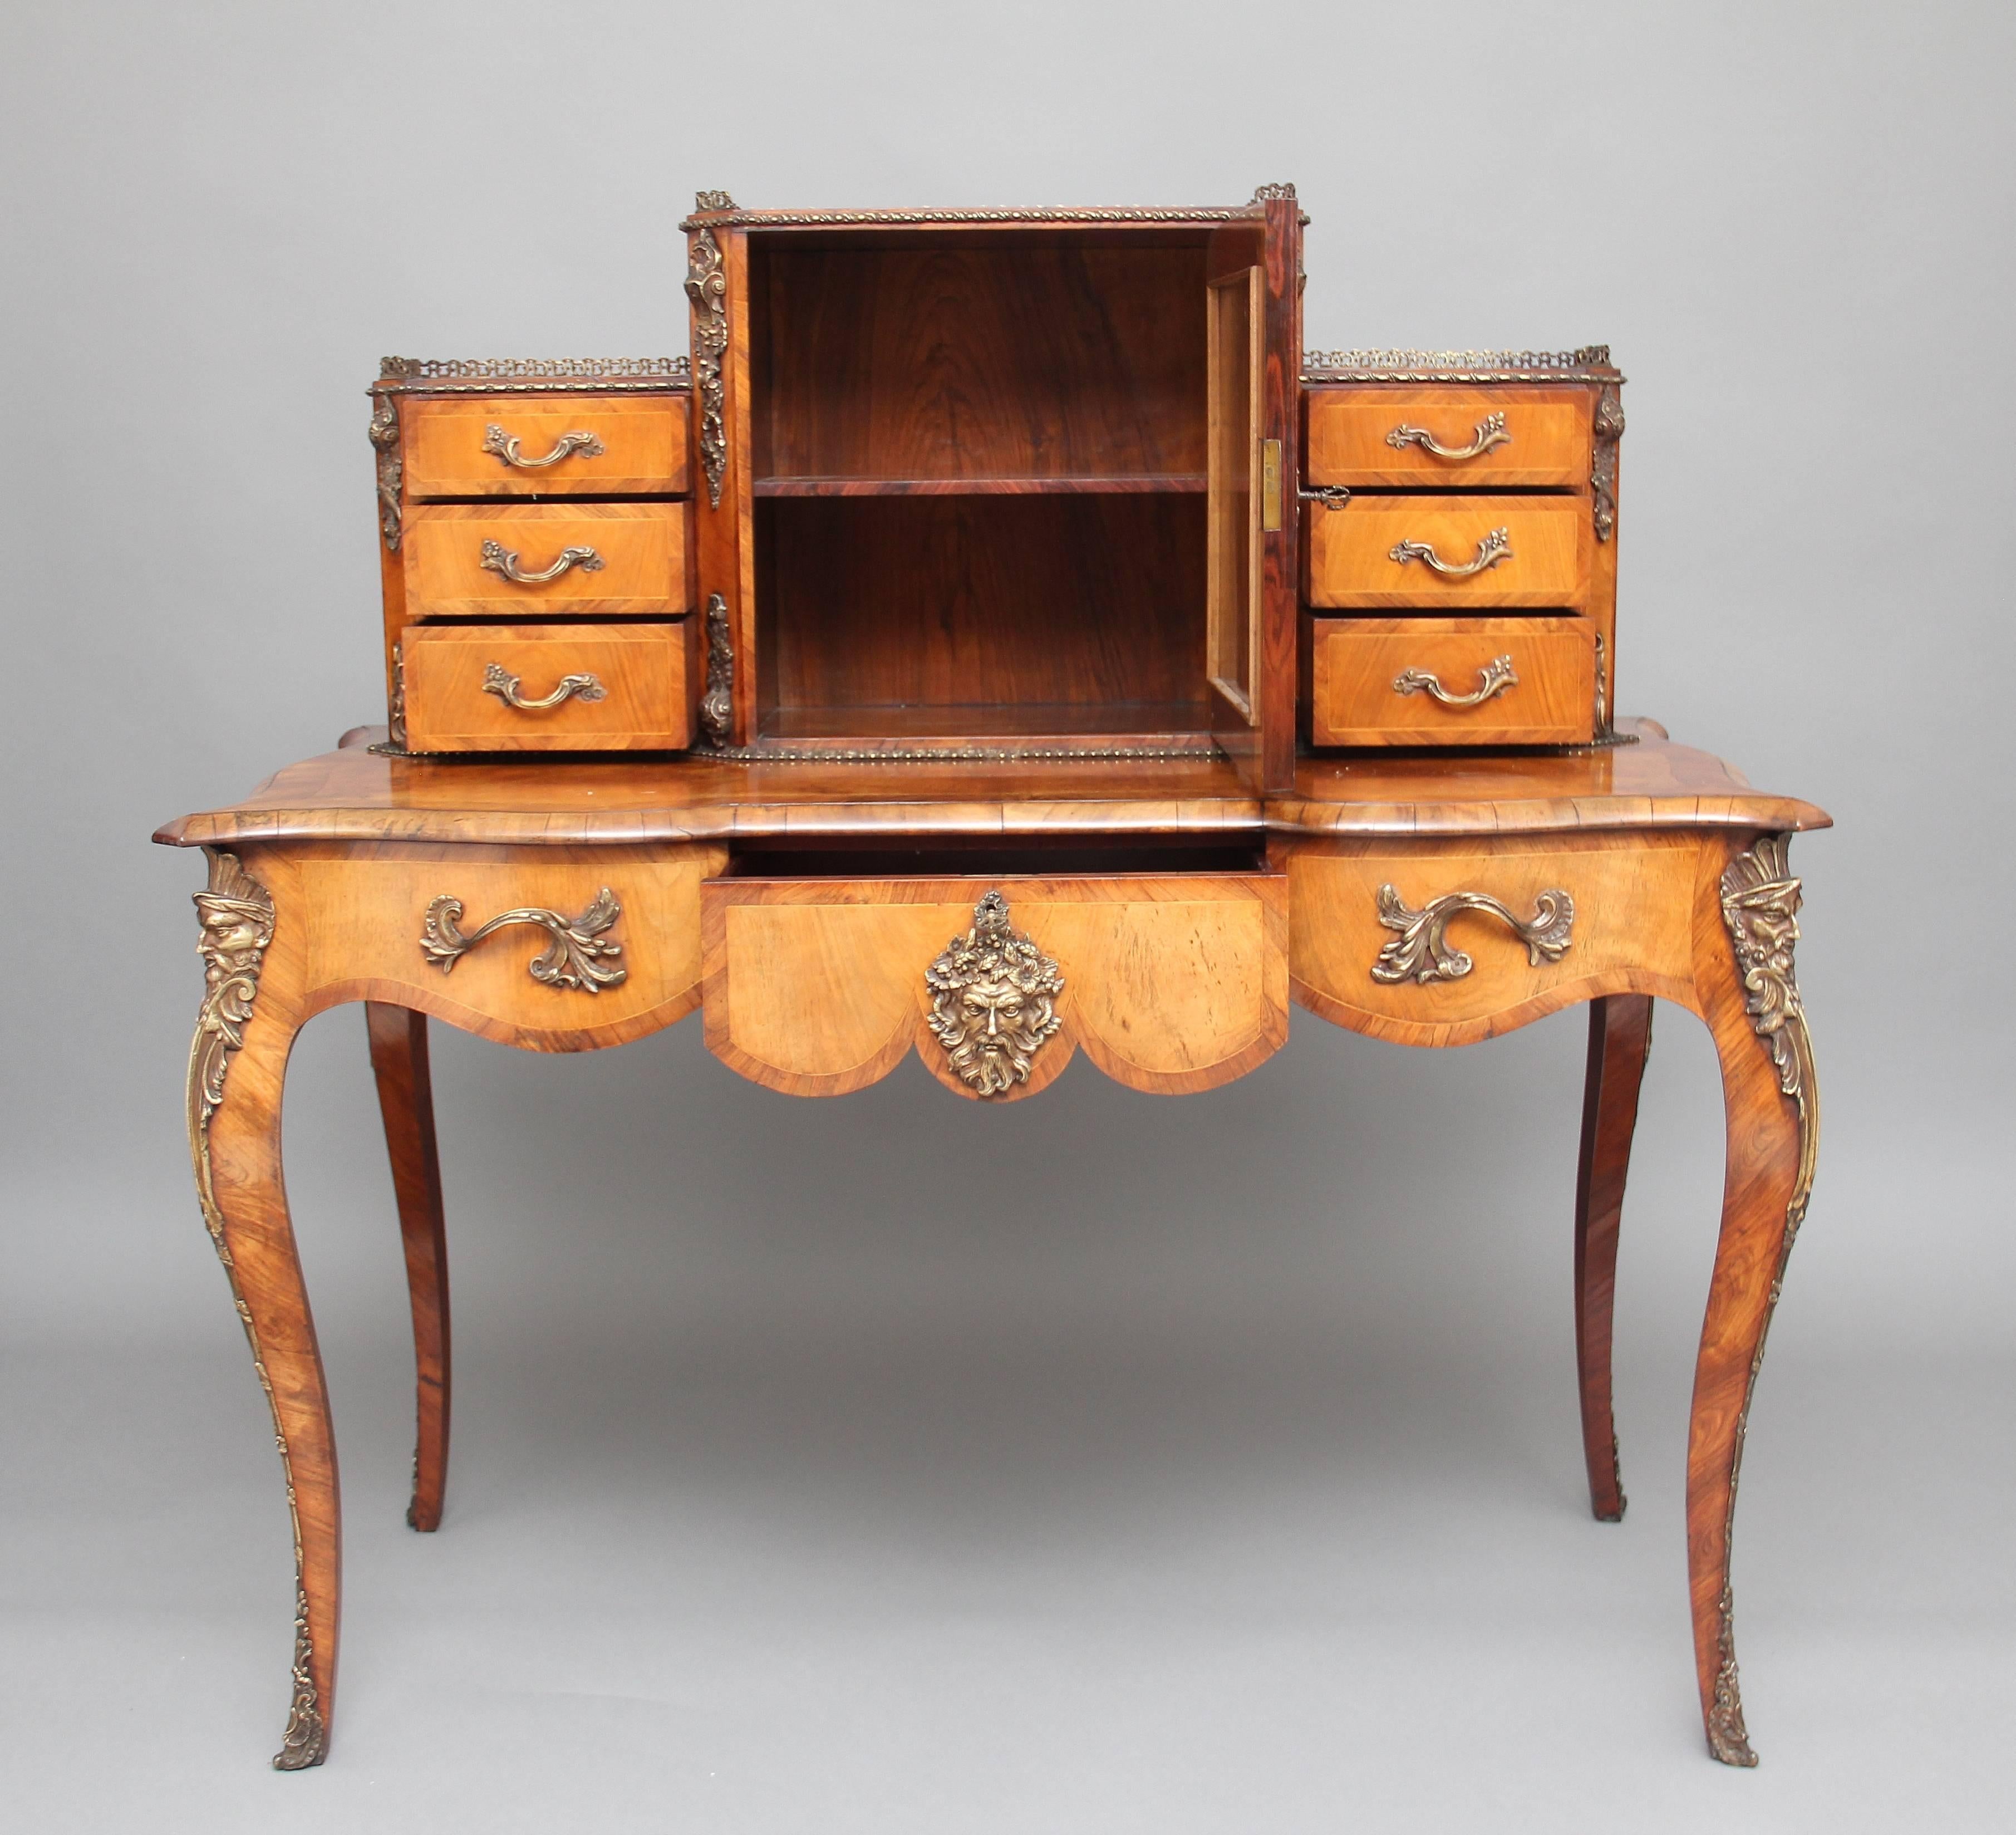 A superb quality 19th century walnut inlaid and gilt metal mounted desk or Bonheur Du Jour of lovely color and proportions, the top having a brass gallery running along all three sections, a cupboard at the centre with a single fixed shelf inside,